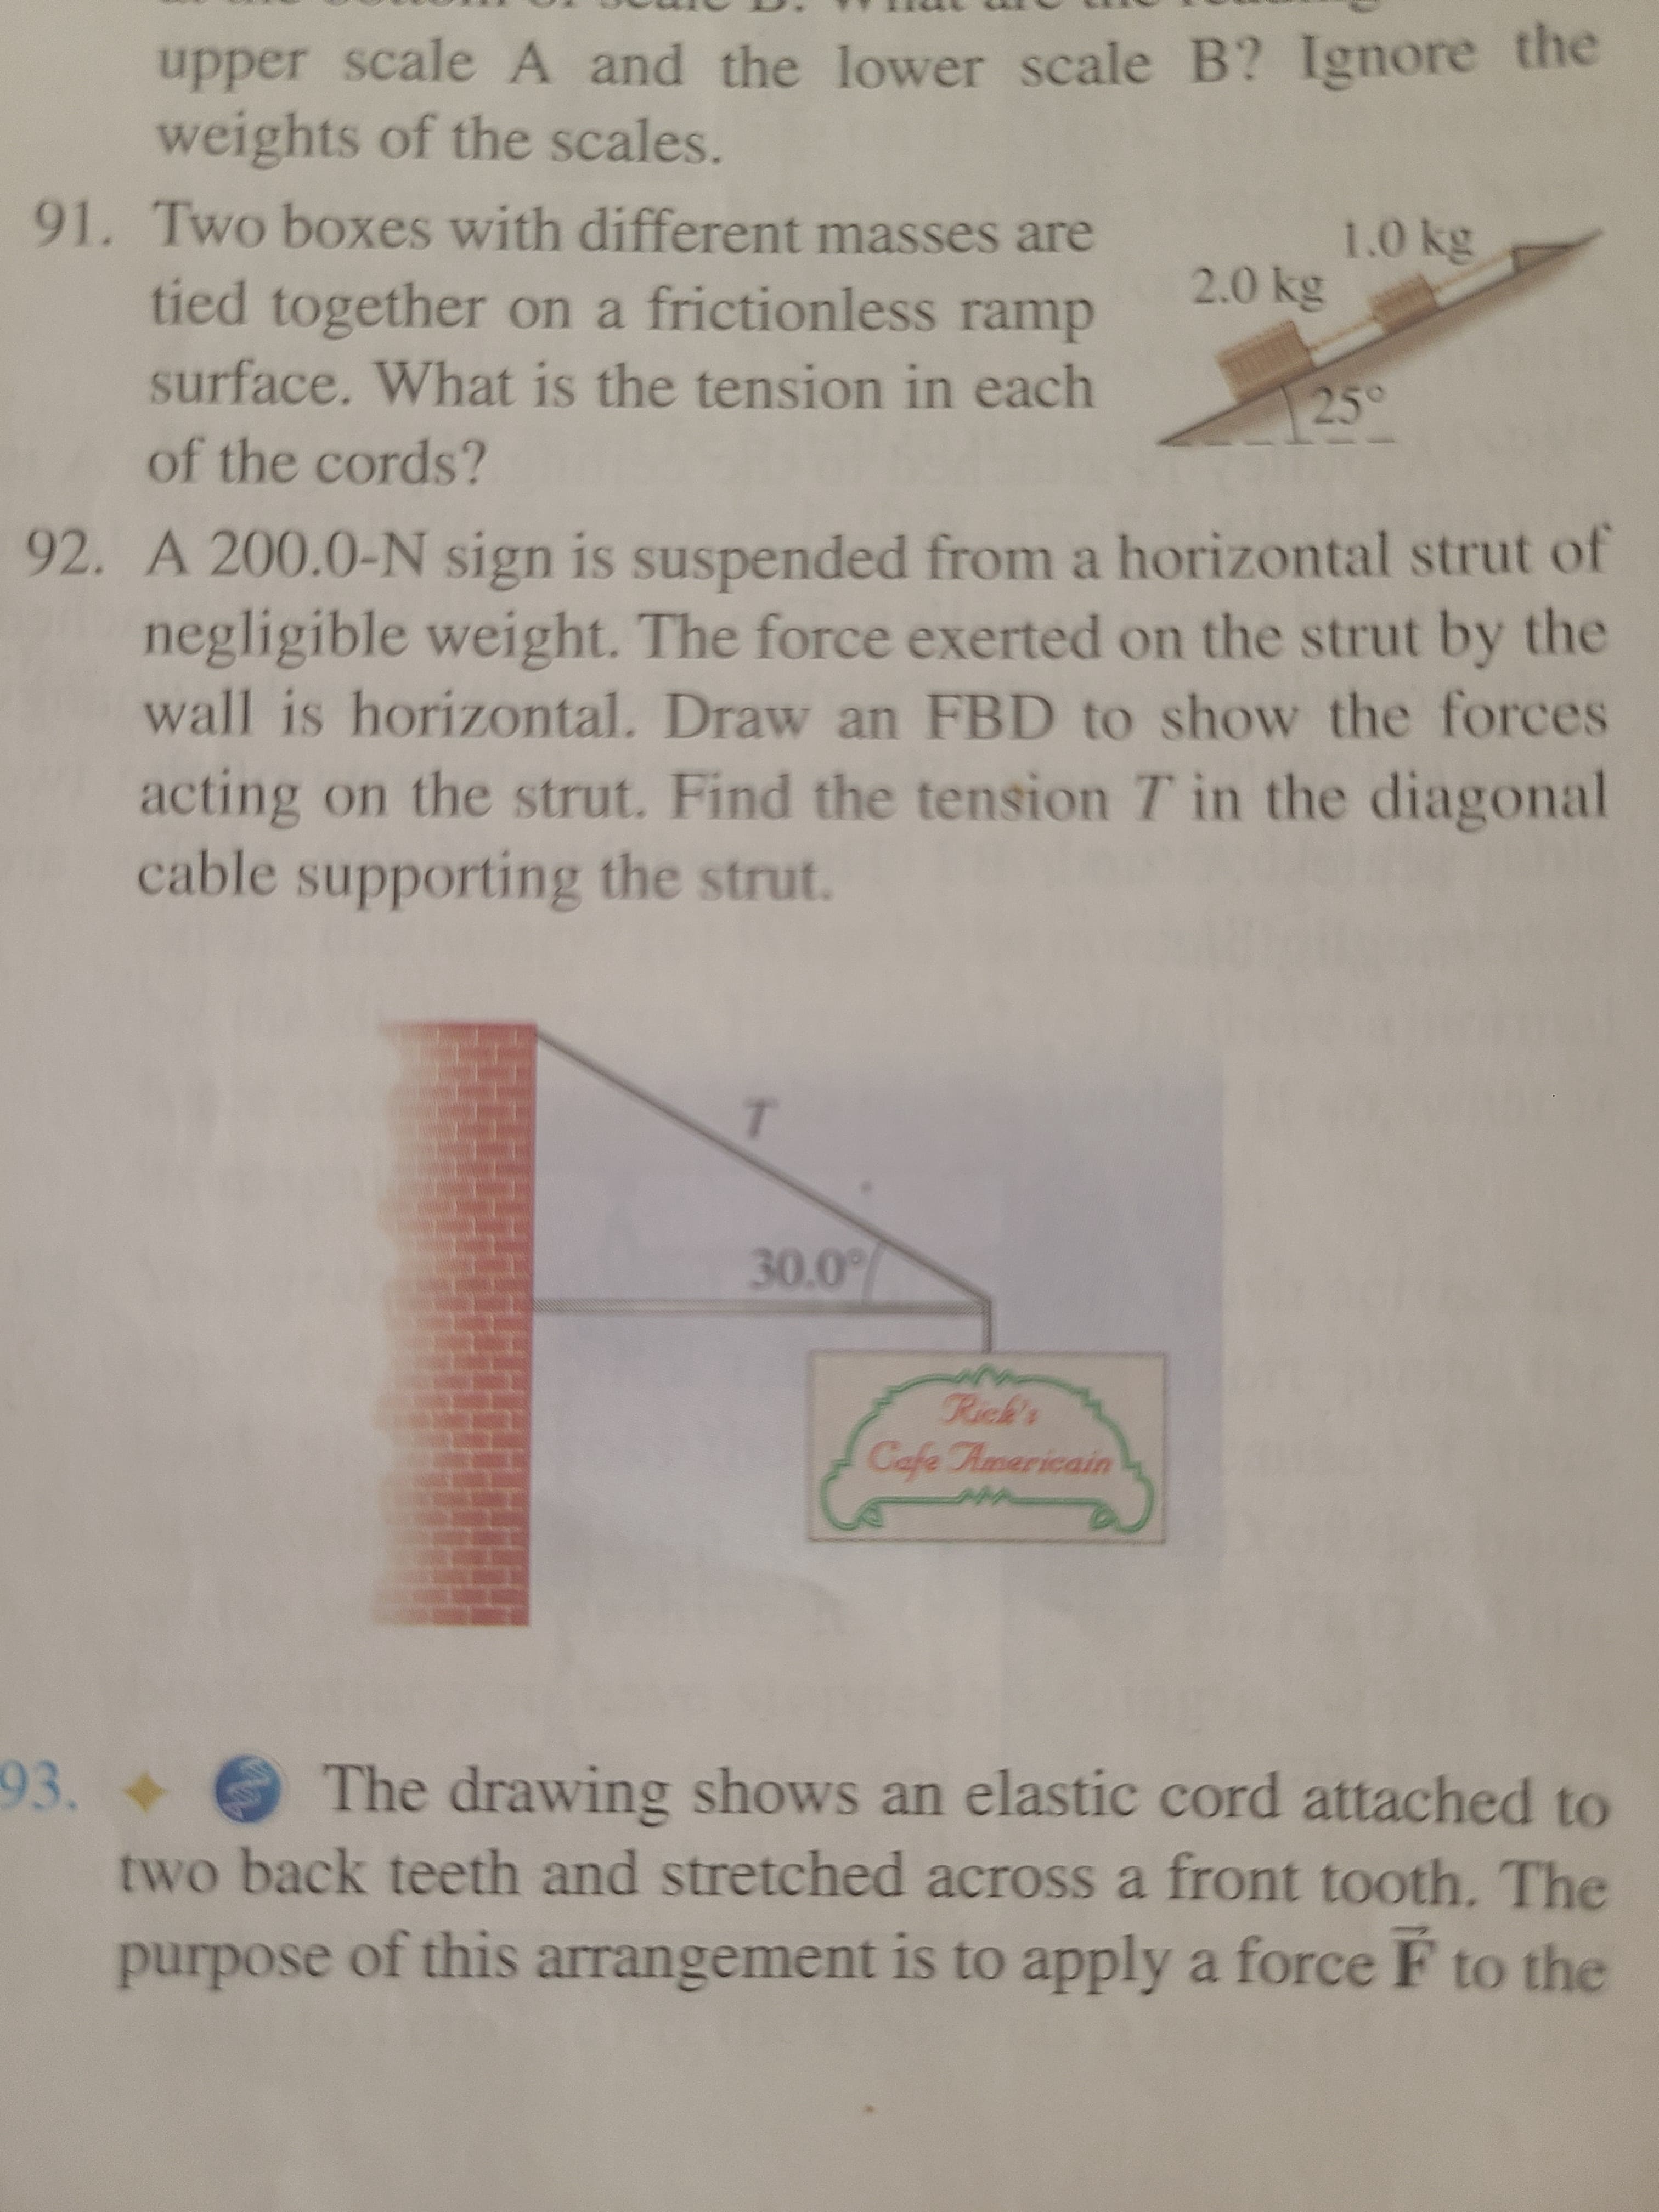 92. A 200.0-N sign is suspended from a horizontal strut of
negligible weight. The force exerted on the strut by the
wall is horizontal. Draw an FBD to show the forces
acting on the strut. Find the tension T in the diagonal
cable supporting the strut.
